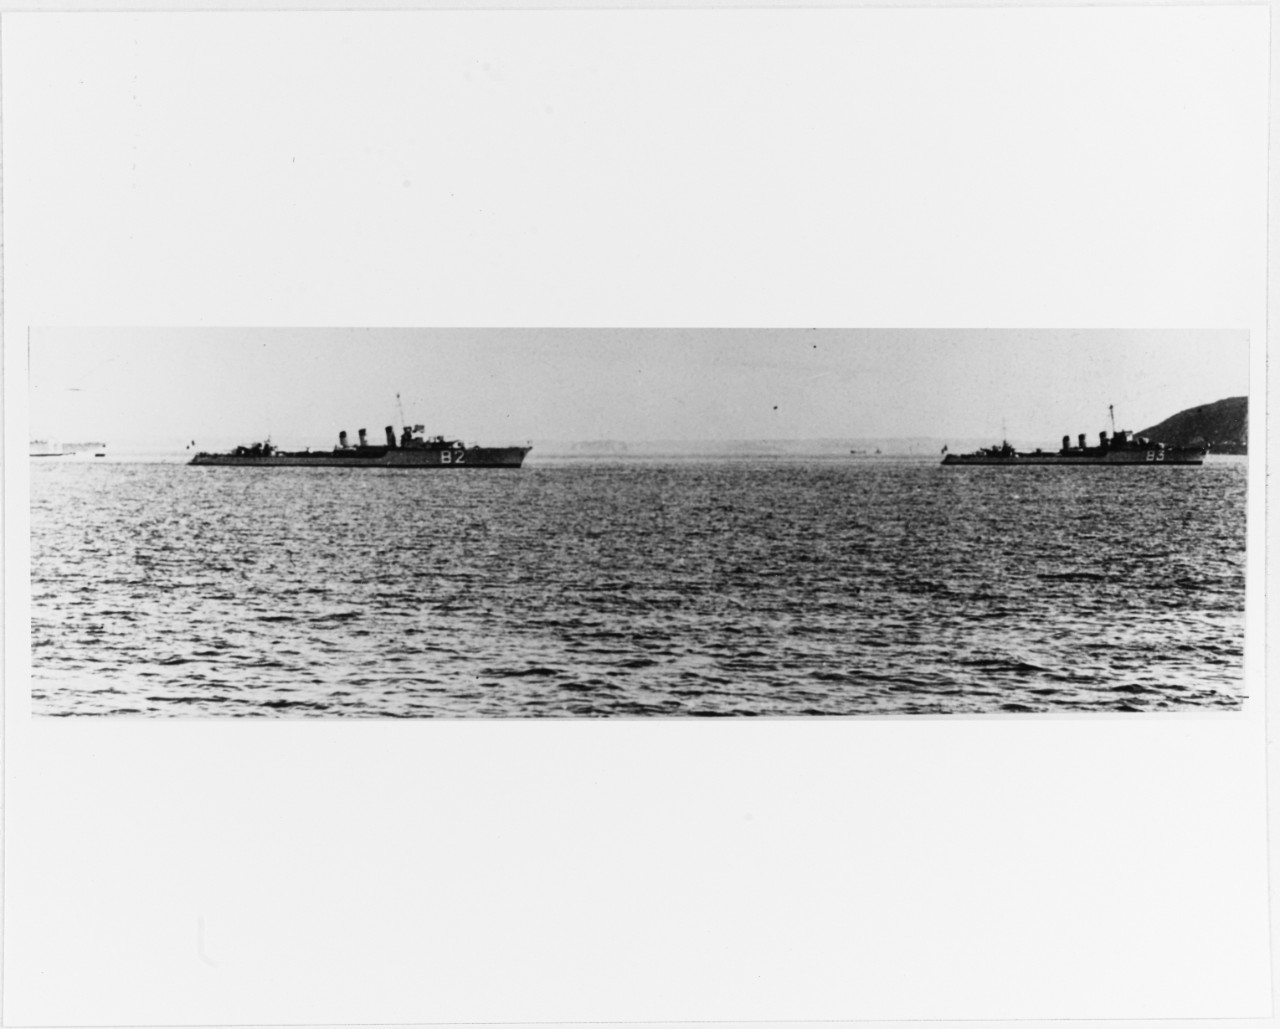 Two French "1500-ton" type destroyers making a port call before World War II.